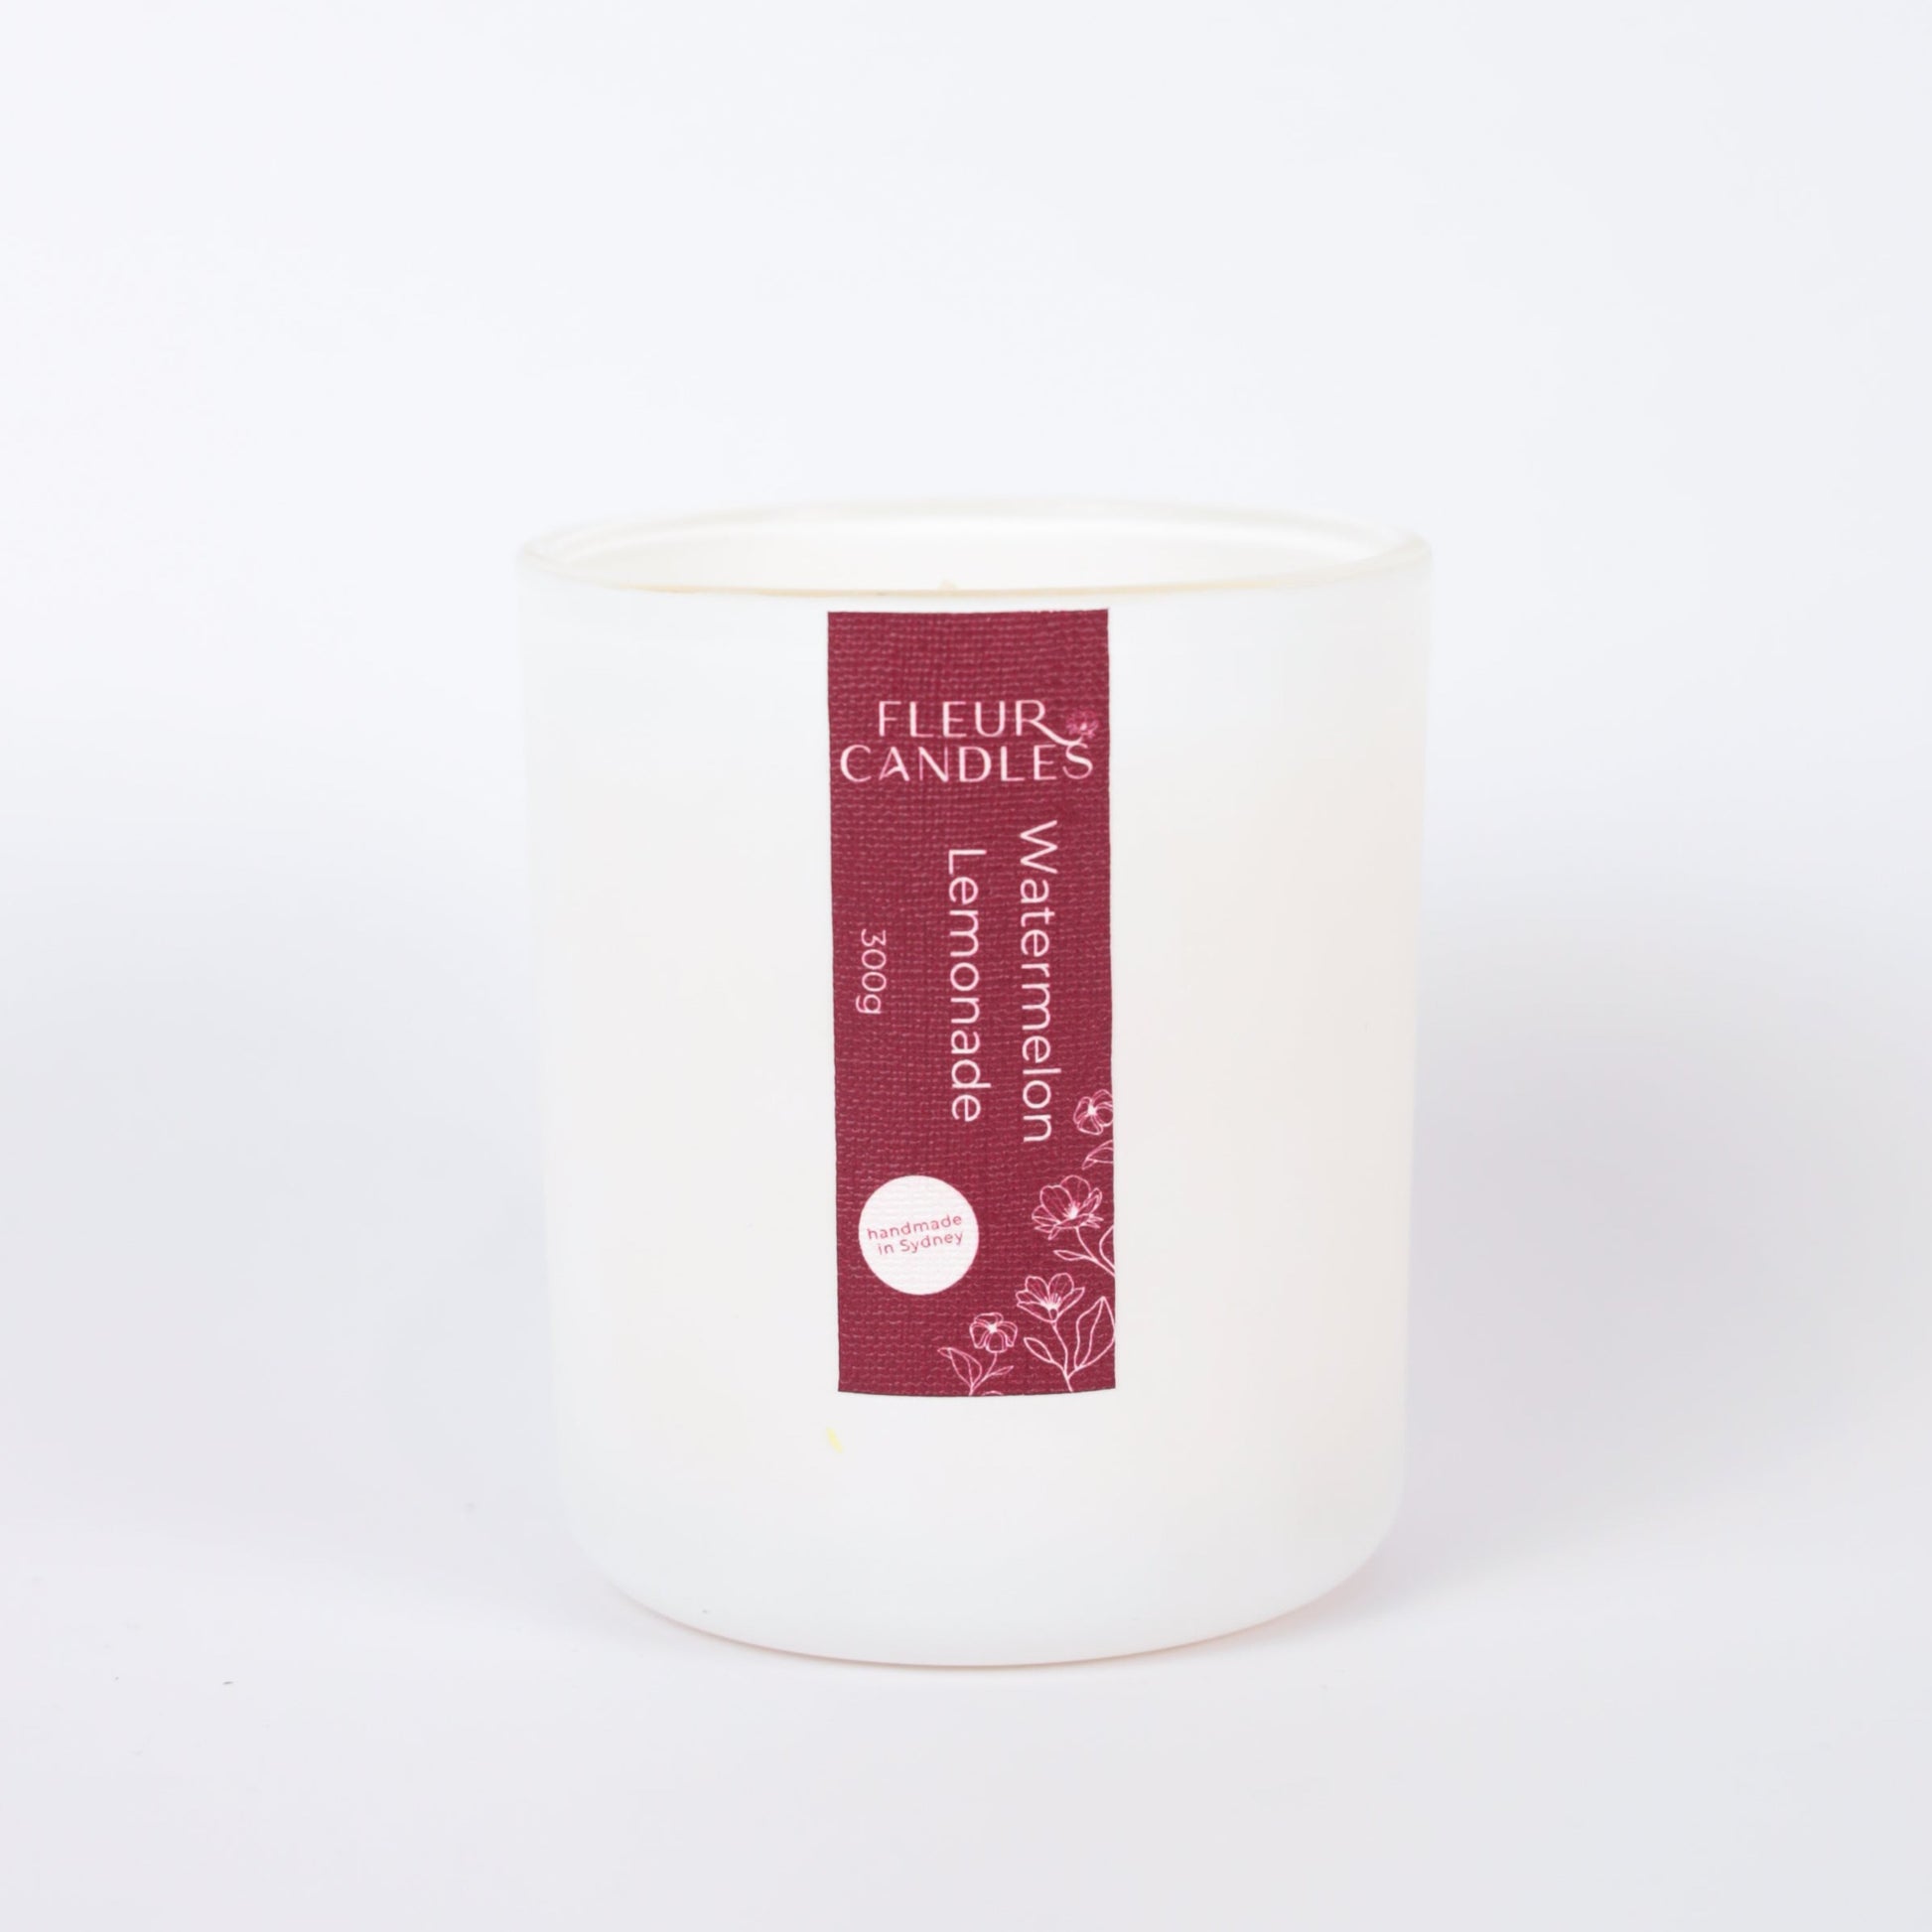 white candle with burgundy label on a white background. fragrance is "watermelon lemonade"